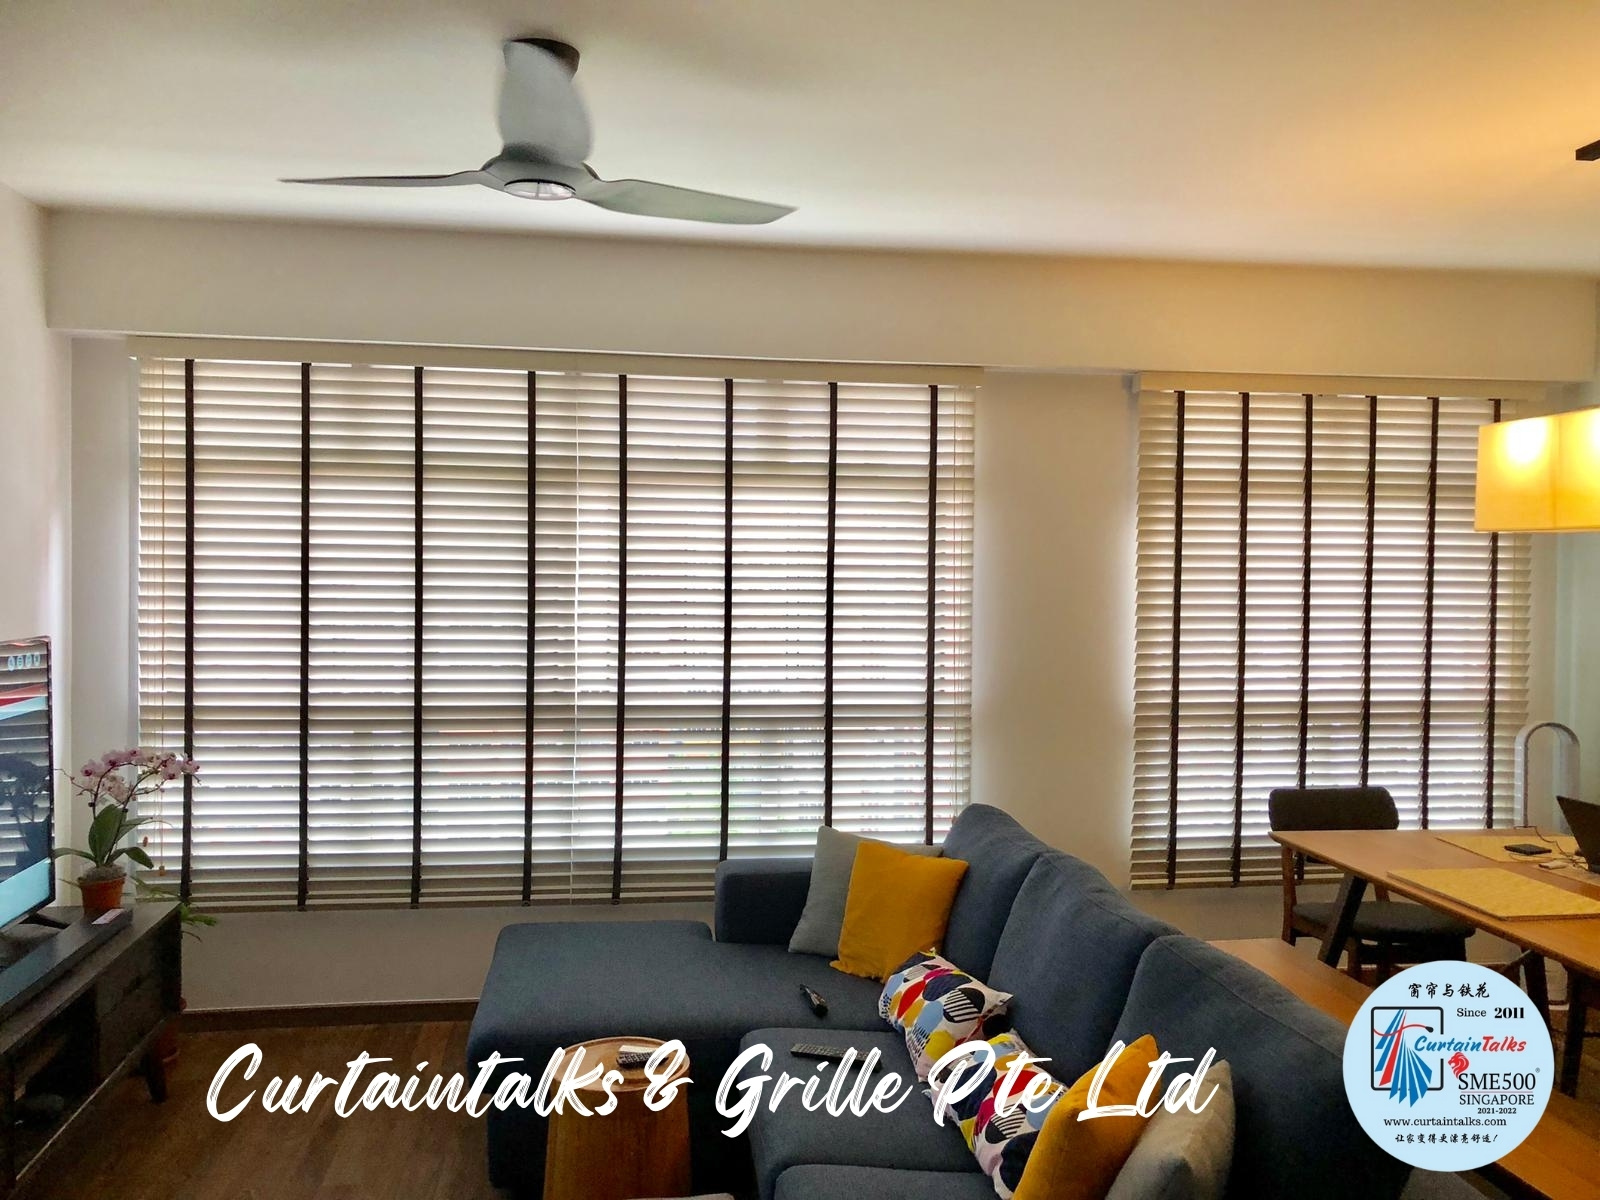 This is a Picture of Wooden Blinds installed at Singapore 5 rooms HDB 325B Sumang Walk, Living Hall